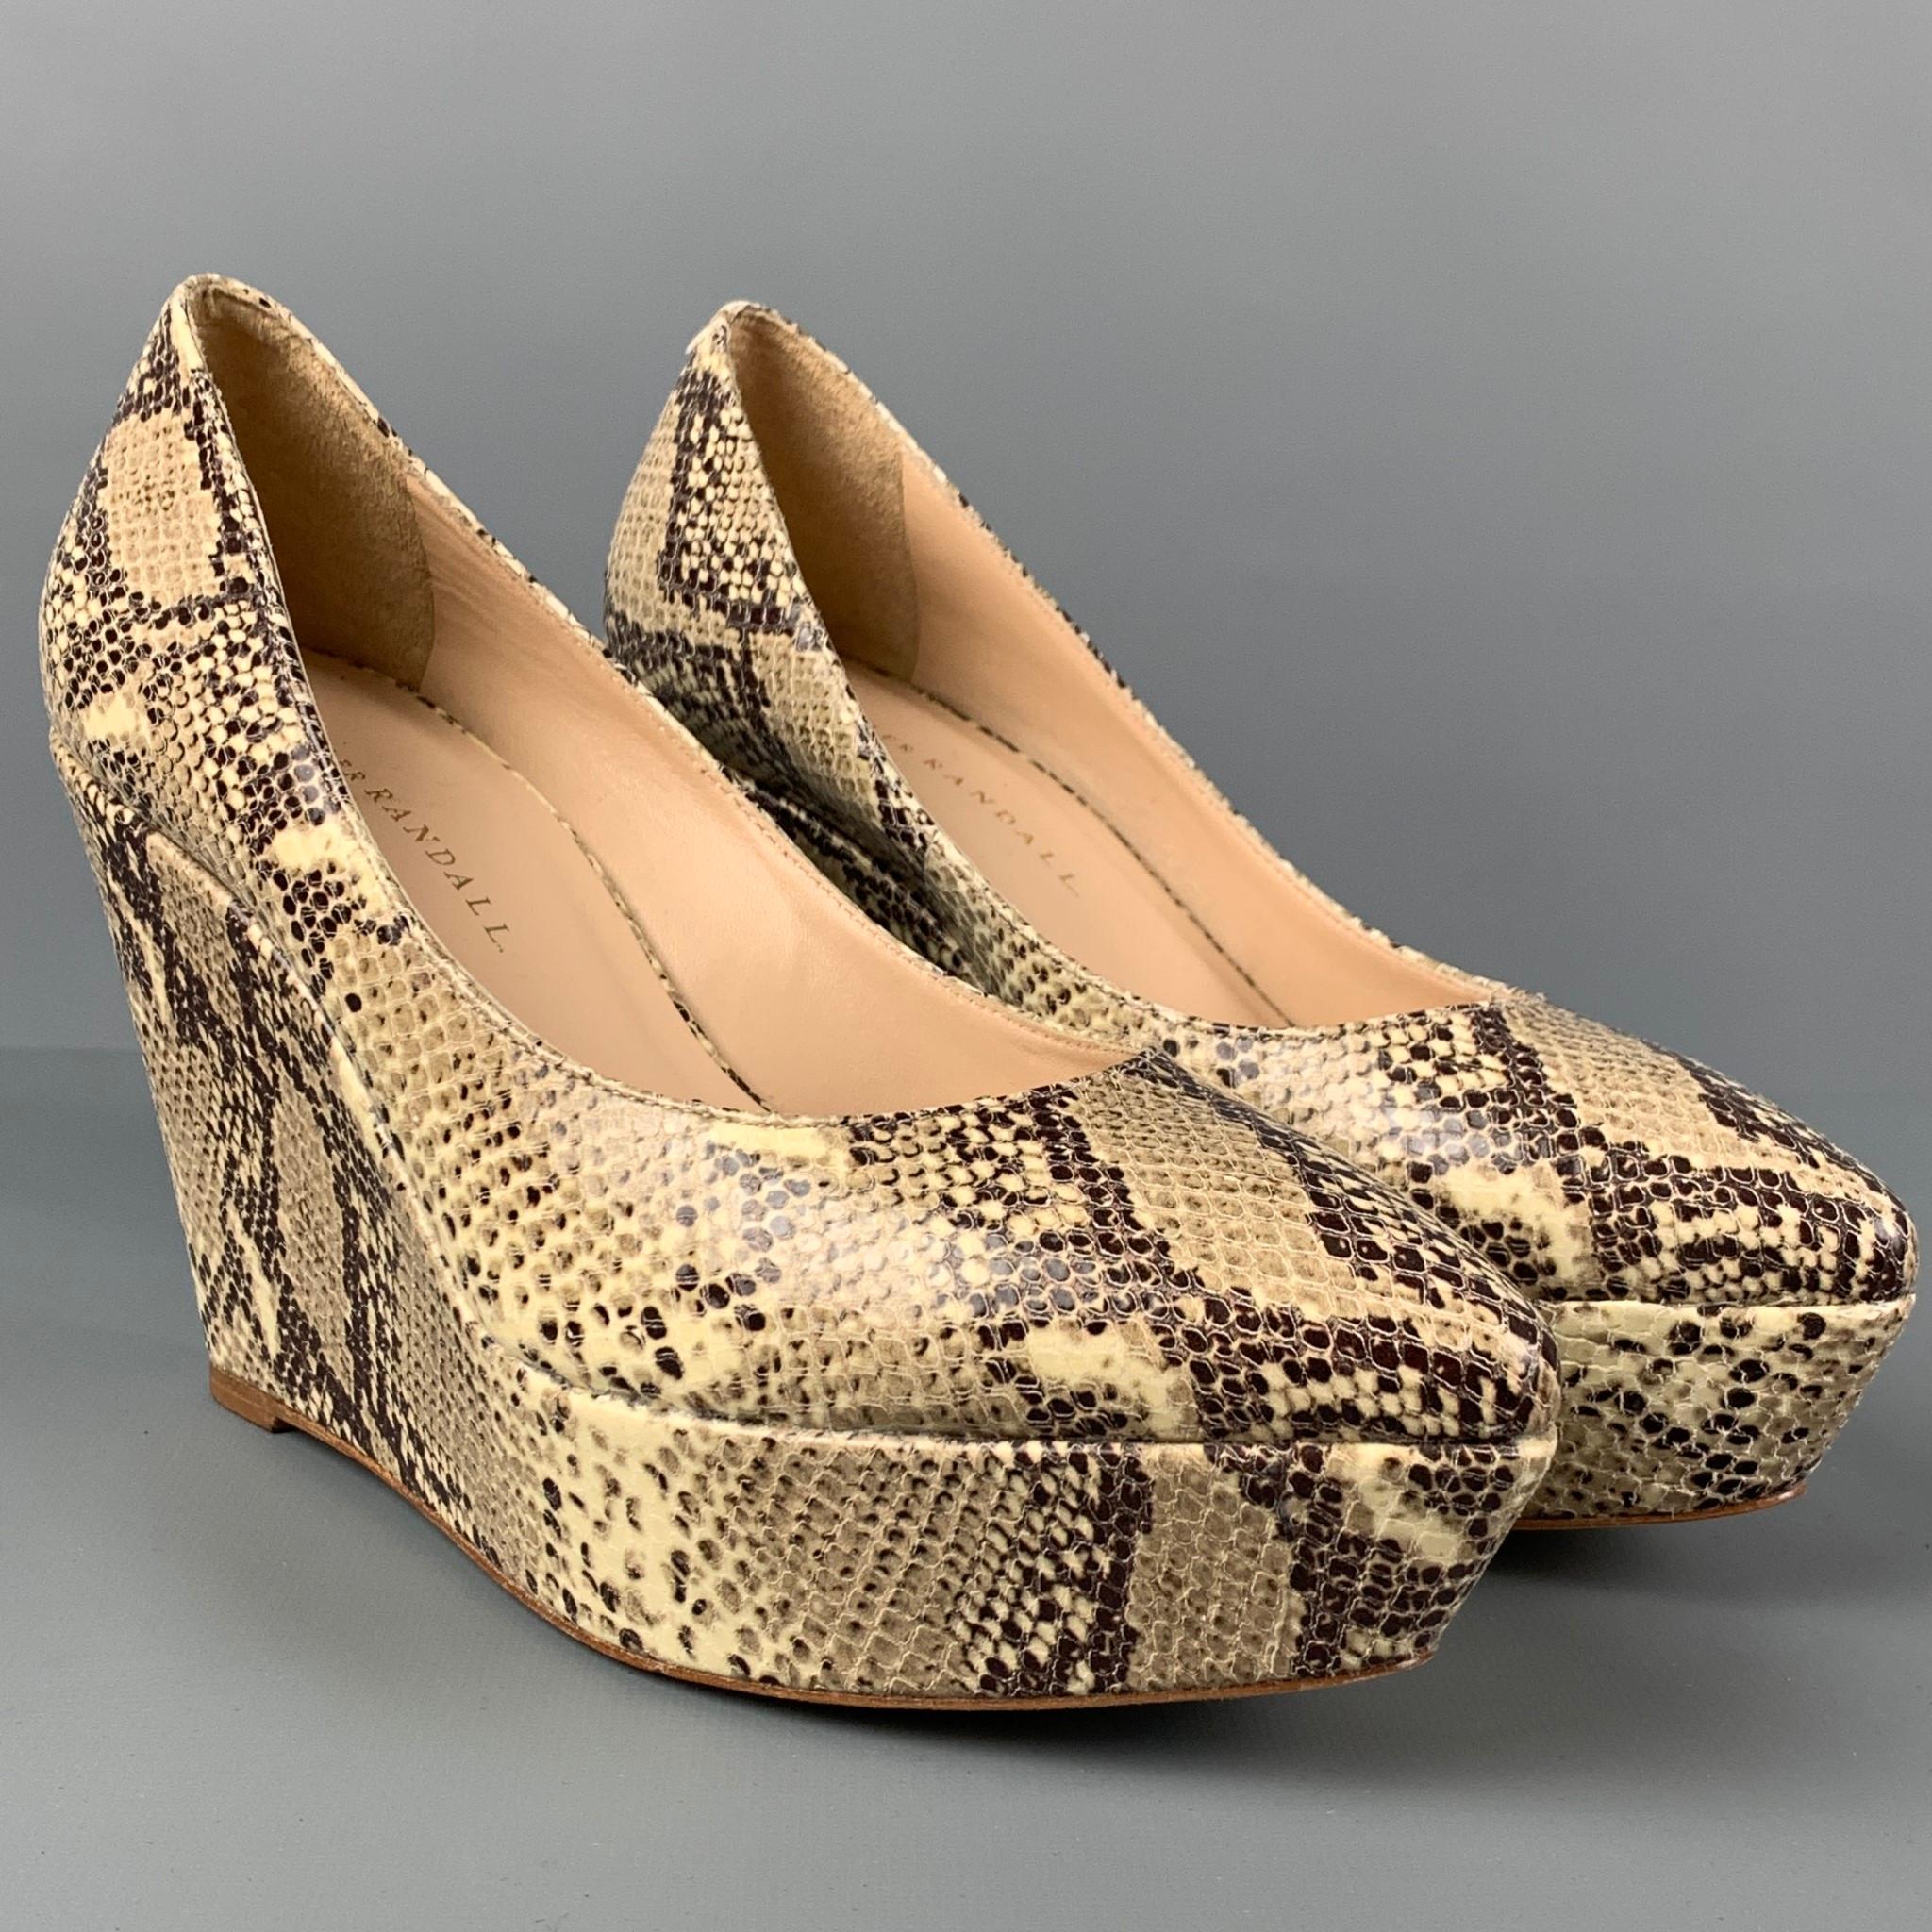 WMV sandals comes in a taupe & beige phyton skin featuring a open toe and a wedge heel. 

Very Good Pre-Owned Condition.
Marked: 8
Original Retail Price: $990.00

Measurements:

Heel:3 in. 